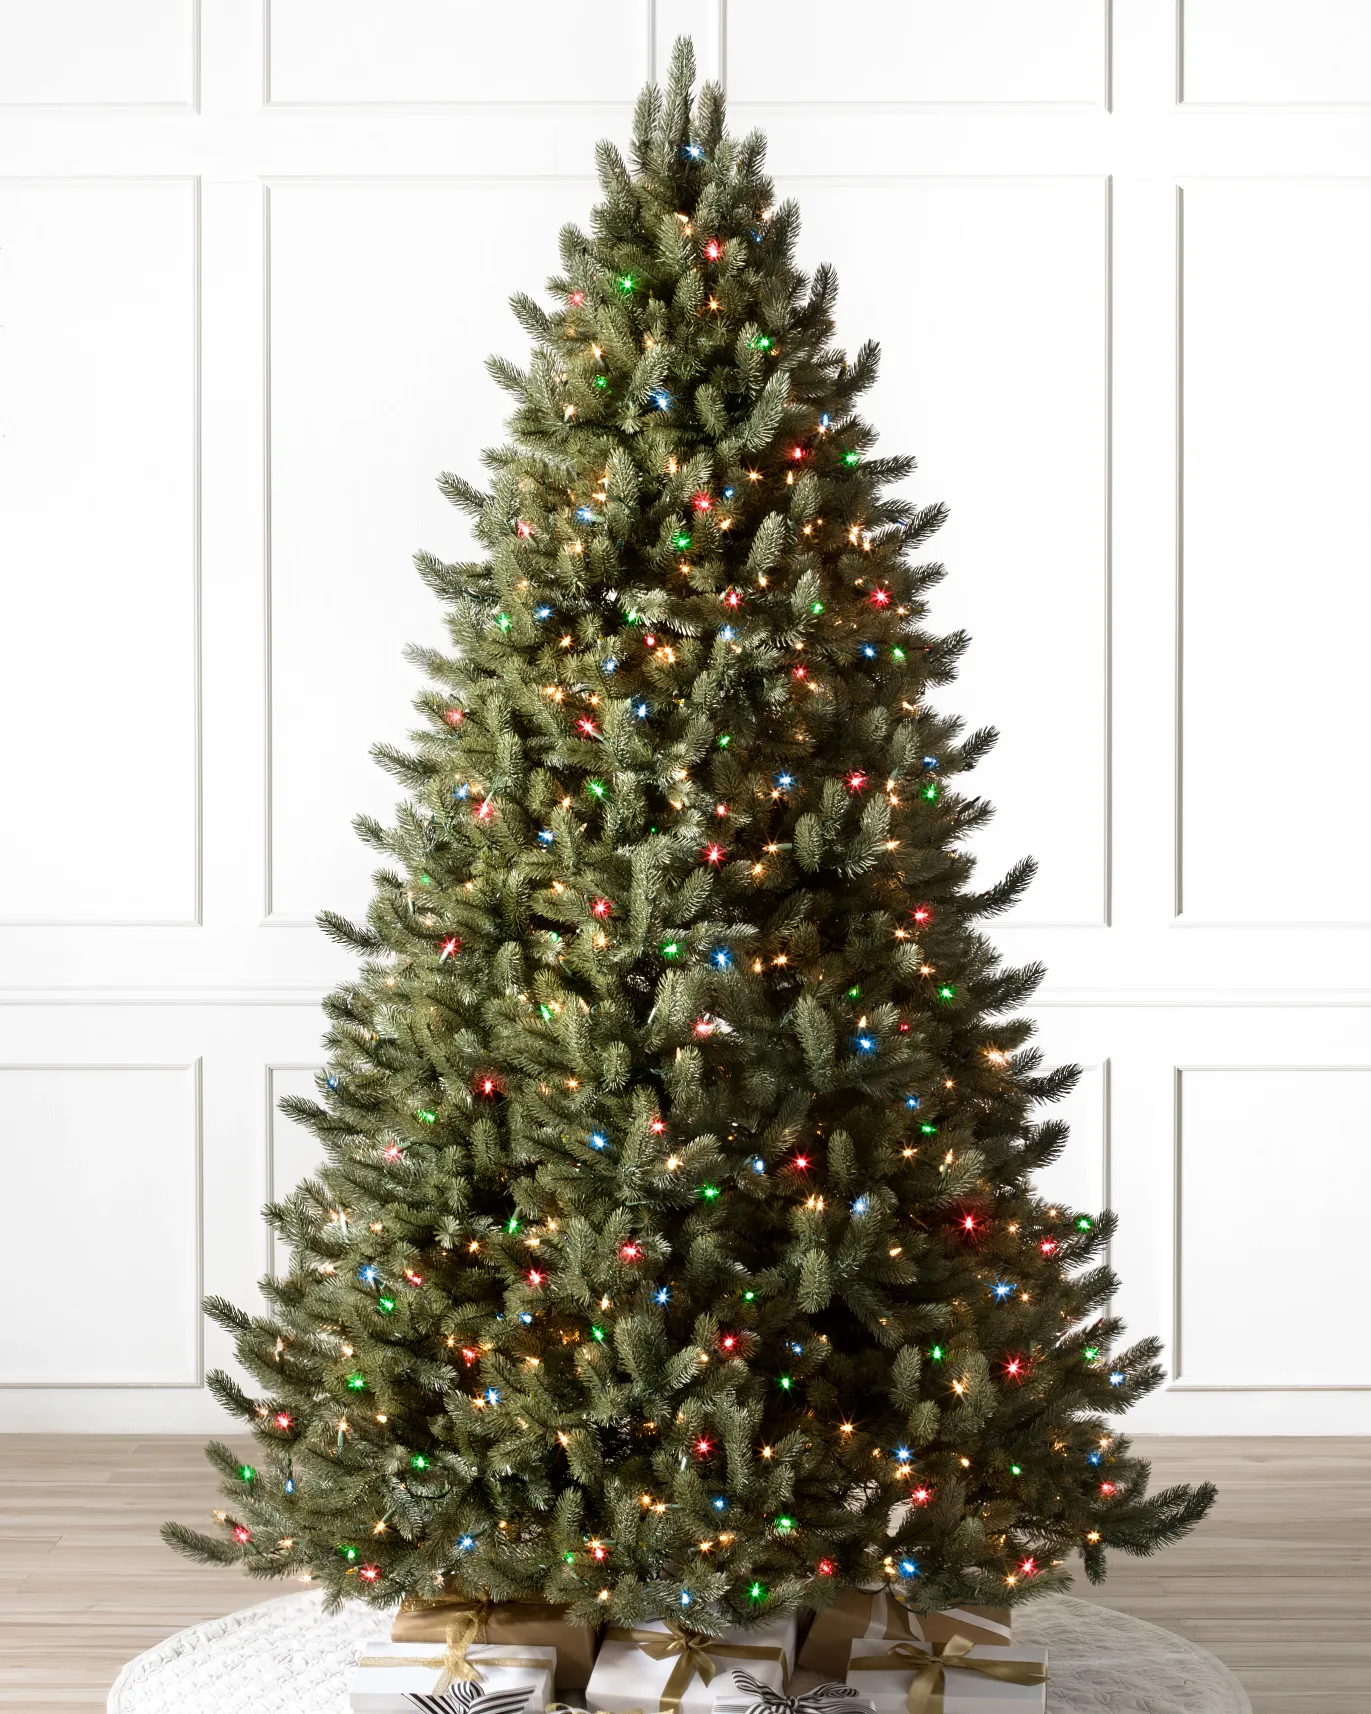 Best Artificial Christmas Trees Of 2023: Top 7 Most Recommended By Experts